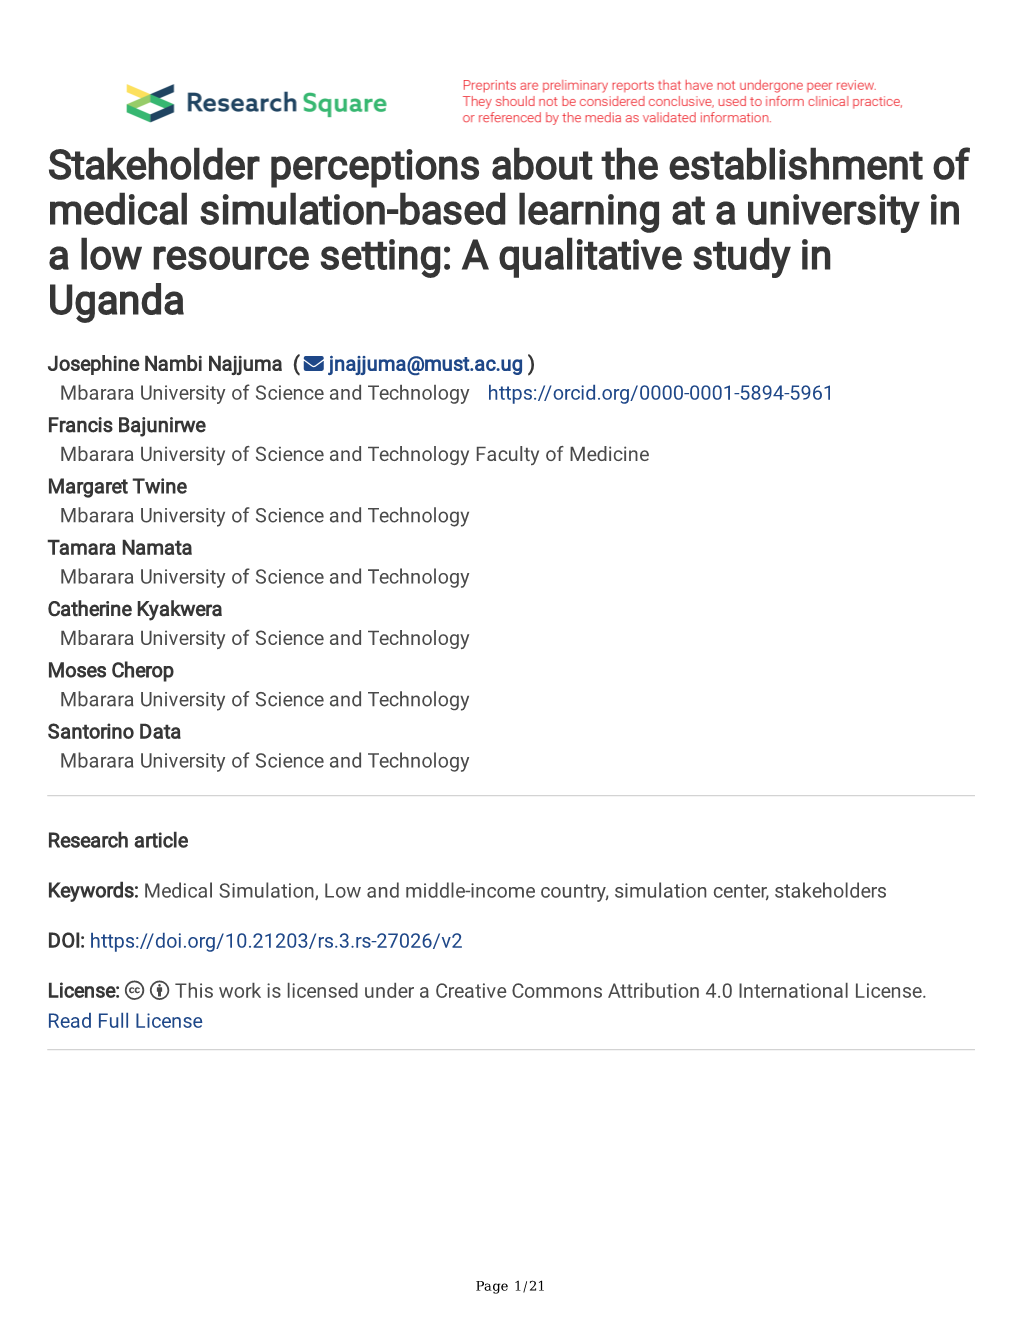 Stakeholder Perceptions About the Establishment of Medical Simulation-Based Learning at a University in a Low Resource Setting: a Qualitative Study in Uganda